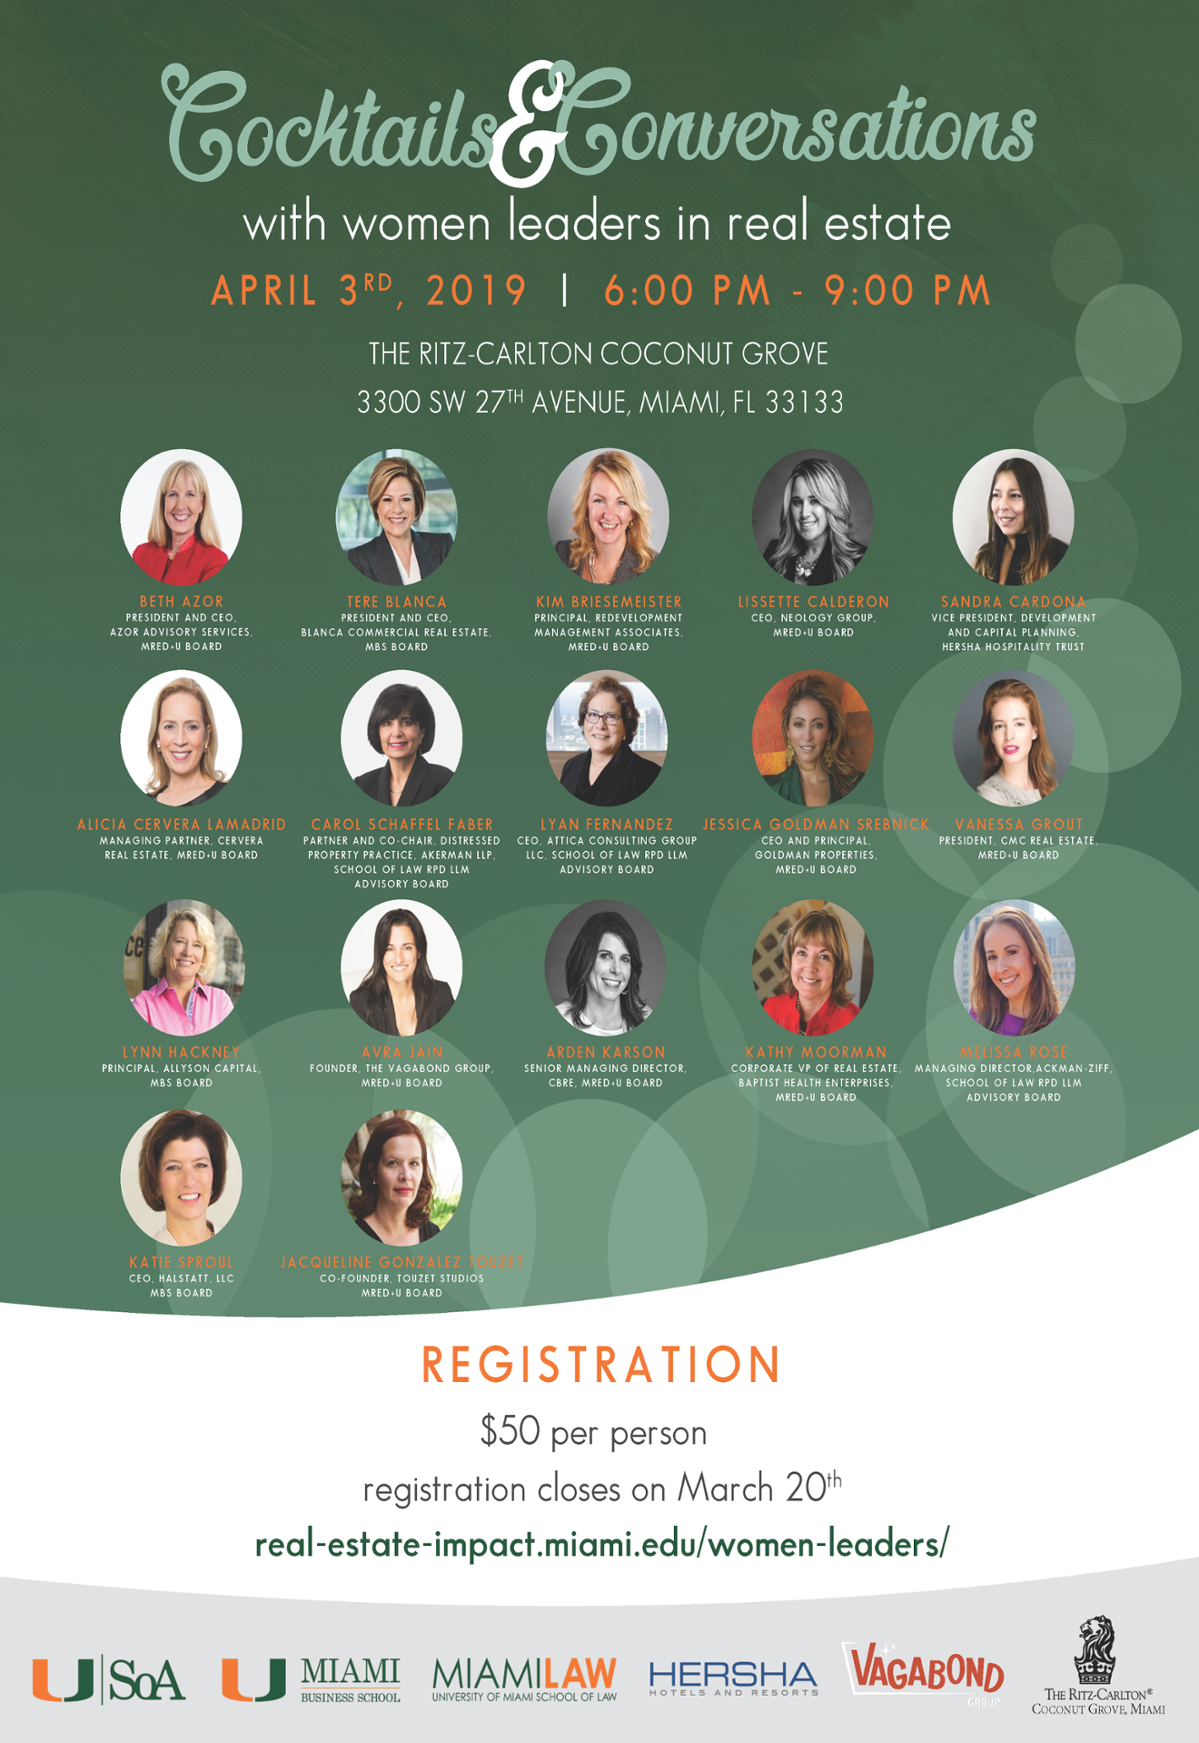 Cocktails and Conversations with Women Leaders in Real Estate